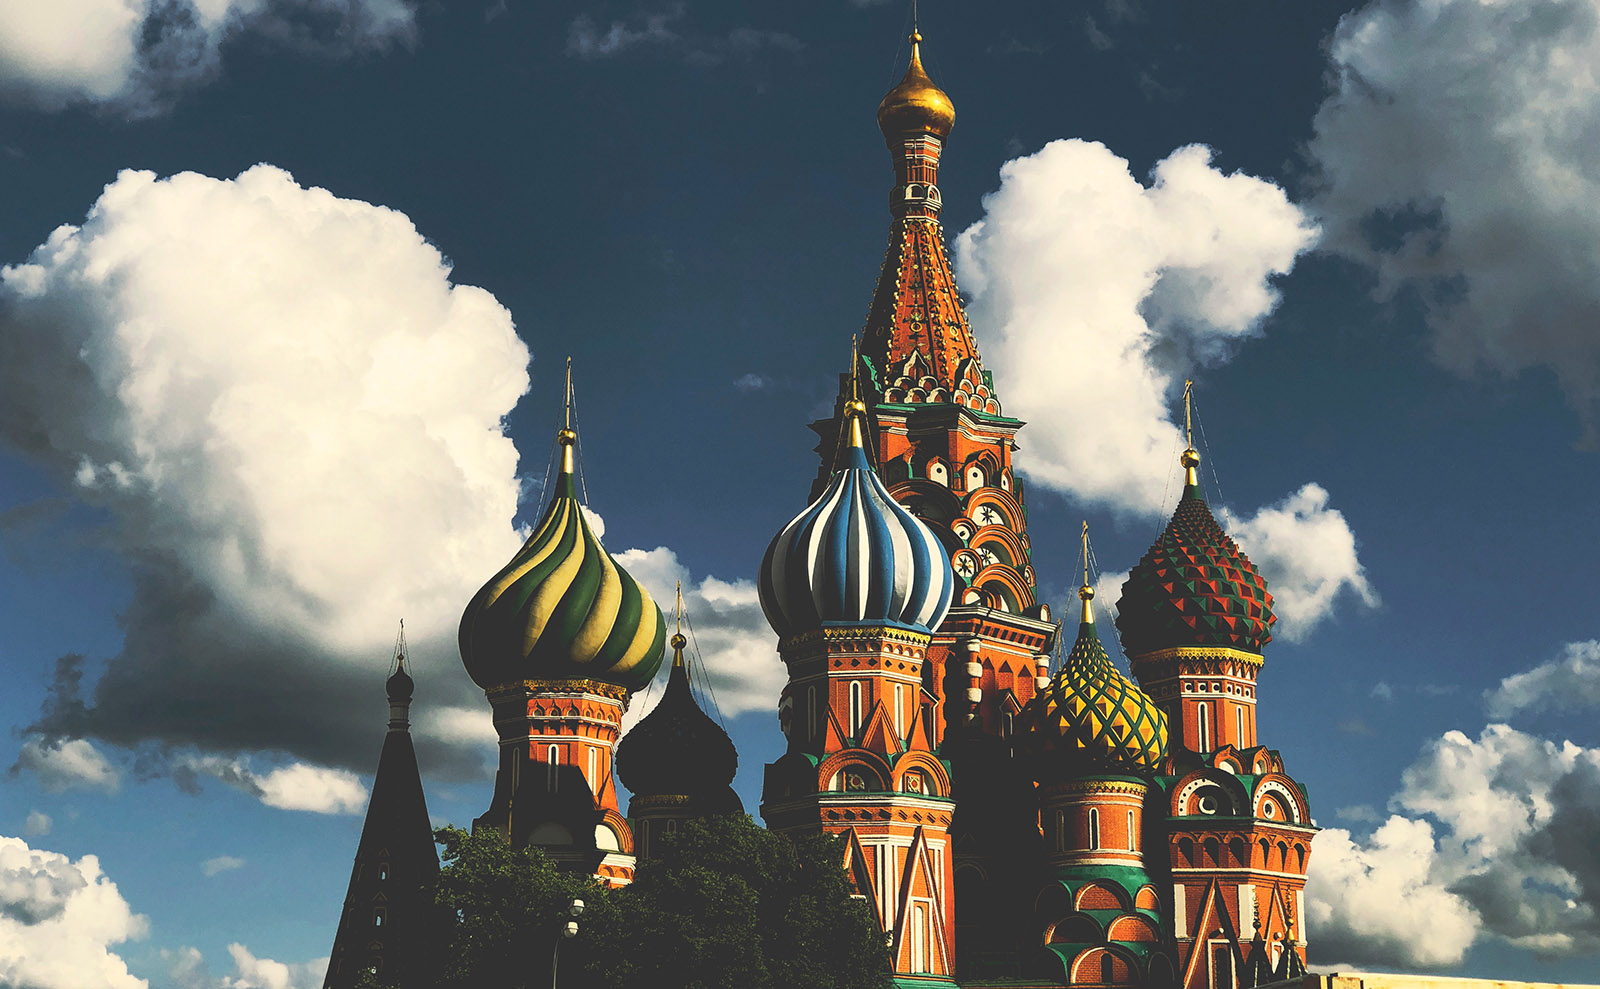 saint basil's cathedral in red square in moscow